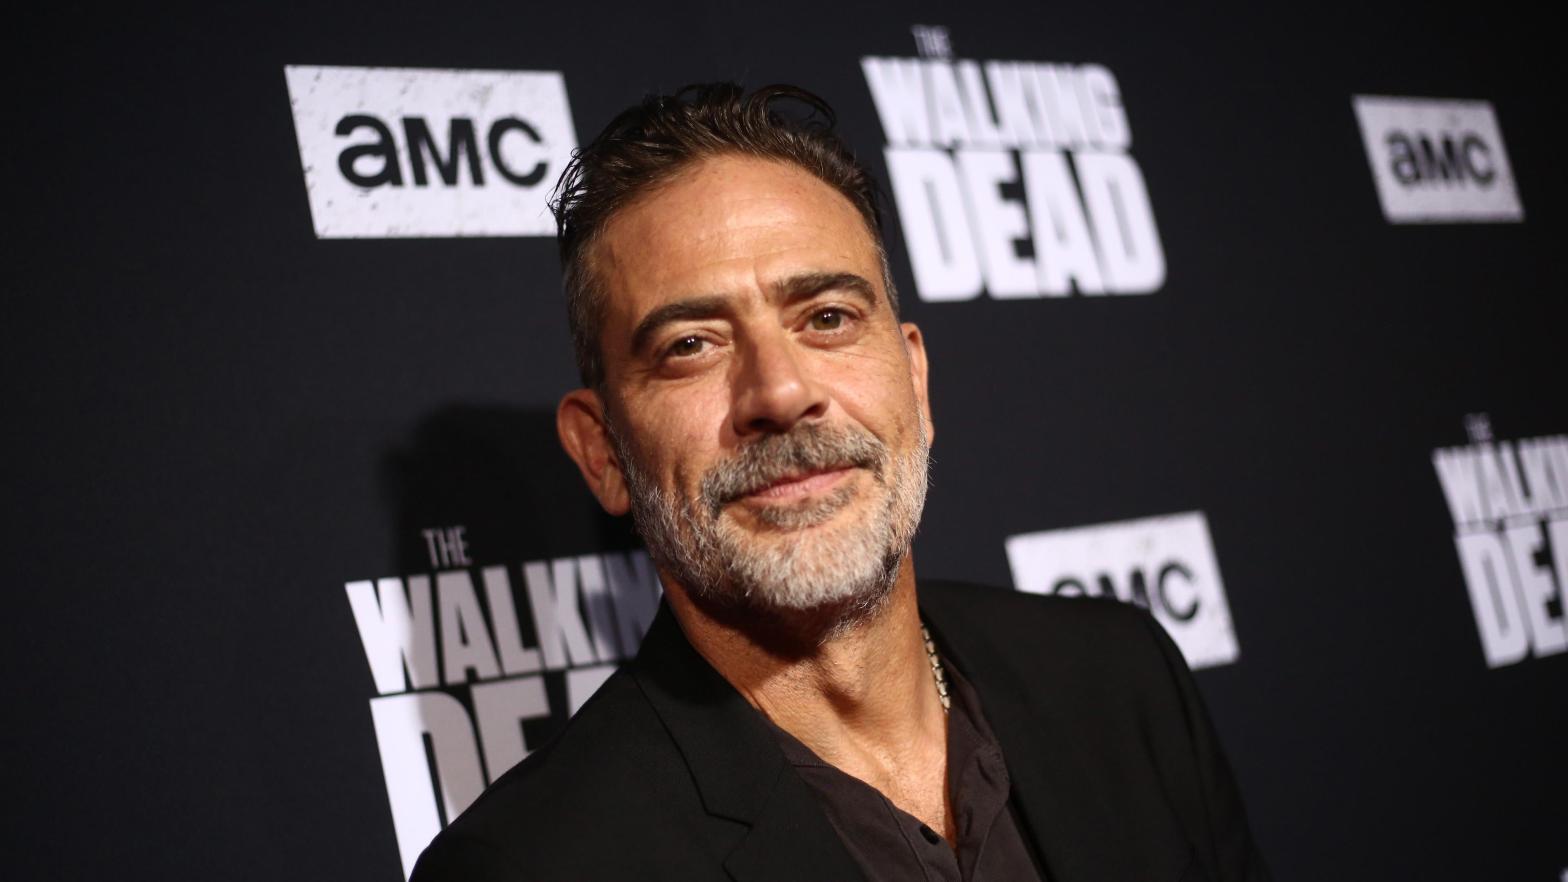 Jeffrey Dean Morgan attends The Walking Dead premiere on September 23, 2019 in West Hollywood, California. (Photo: Tommaso Boddi/Getty Images for AMC, Getty Images)